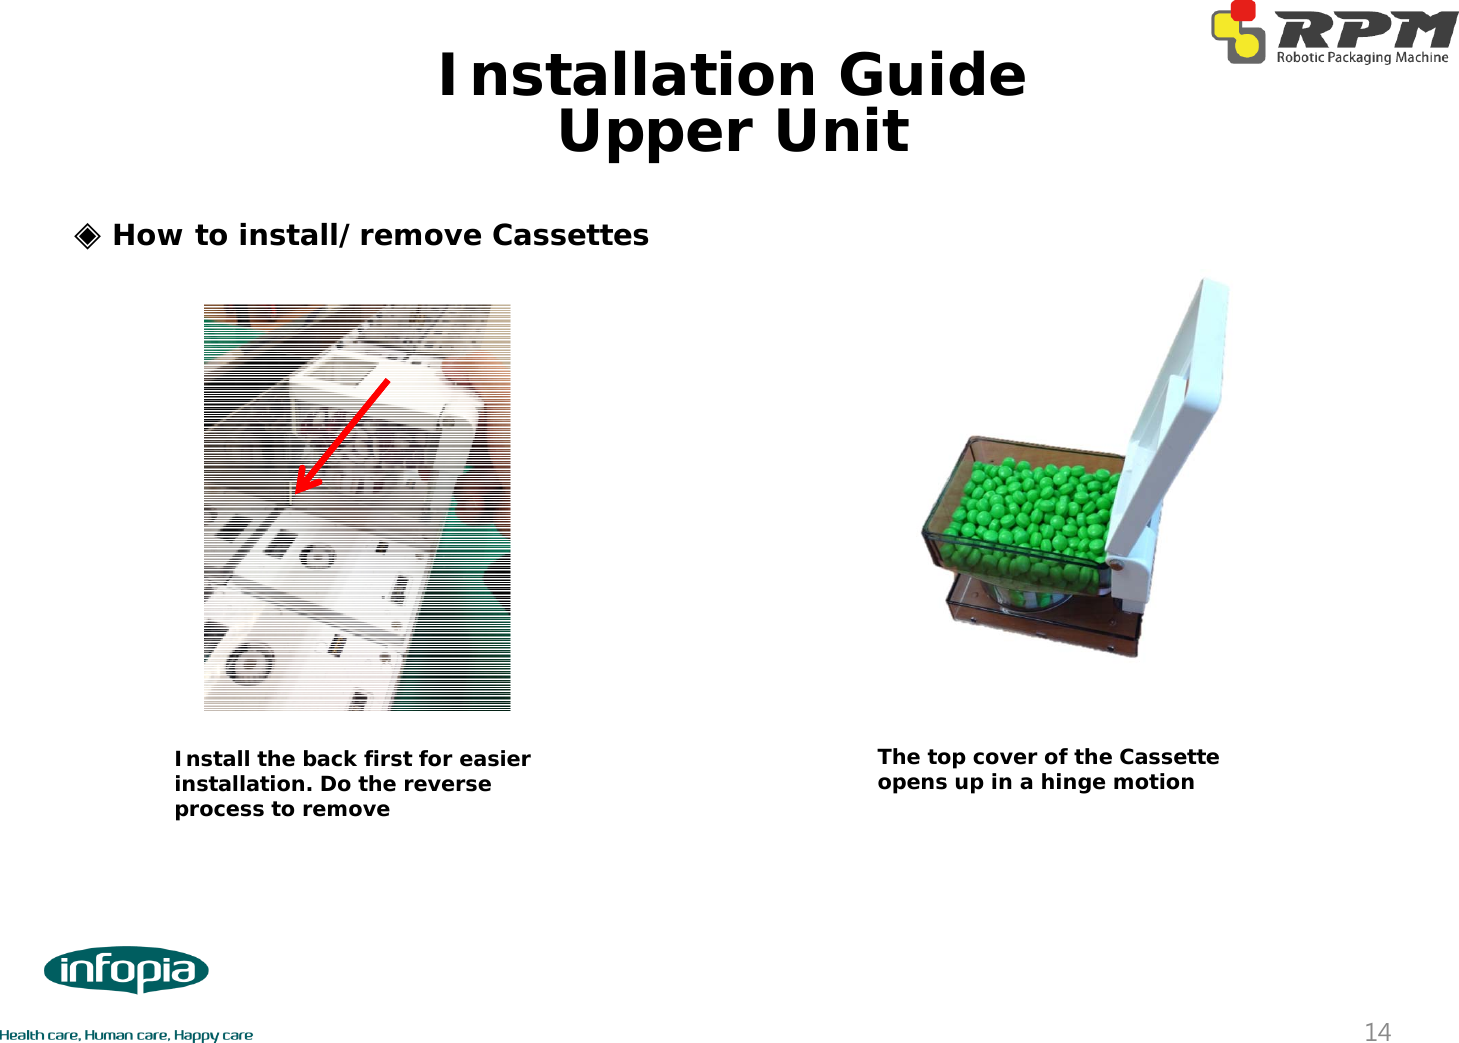 ◈How to install/remove CassettesInstall the back first for easier installation. Do the reverse process to remove The top cover of the Cassette opens up in a hinge motionUpper Unit14Installation Guide